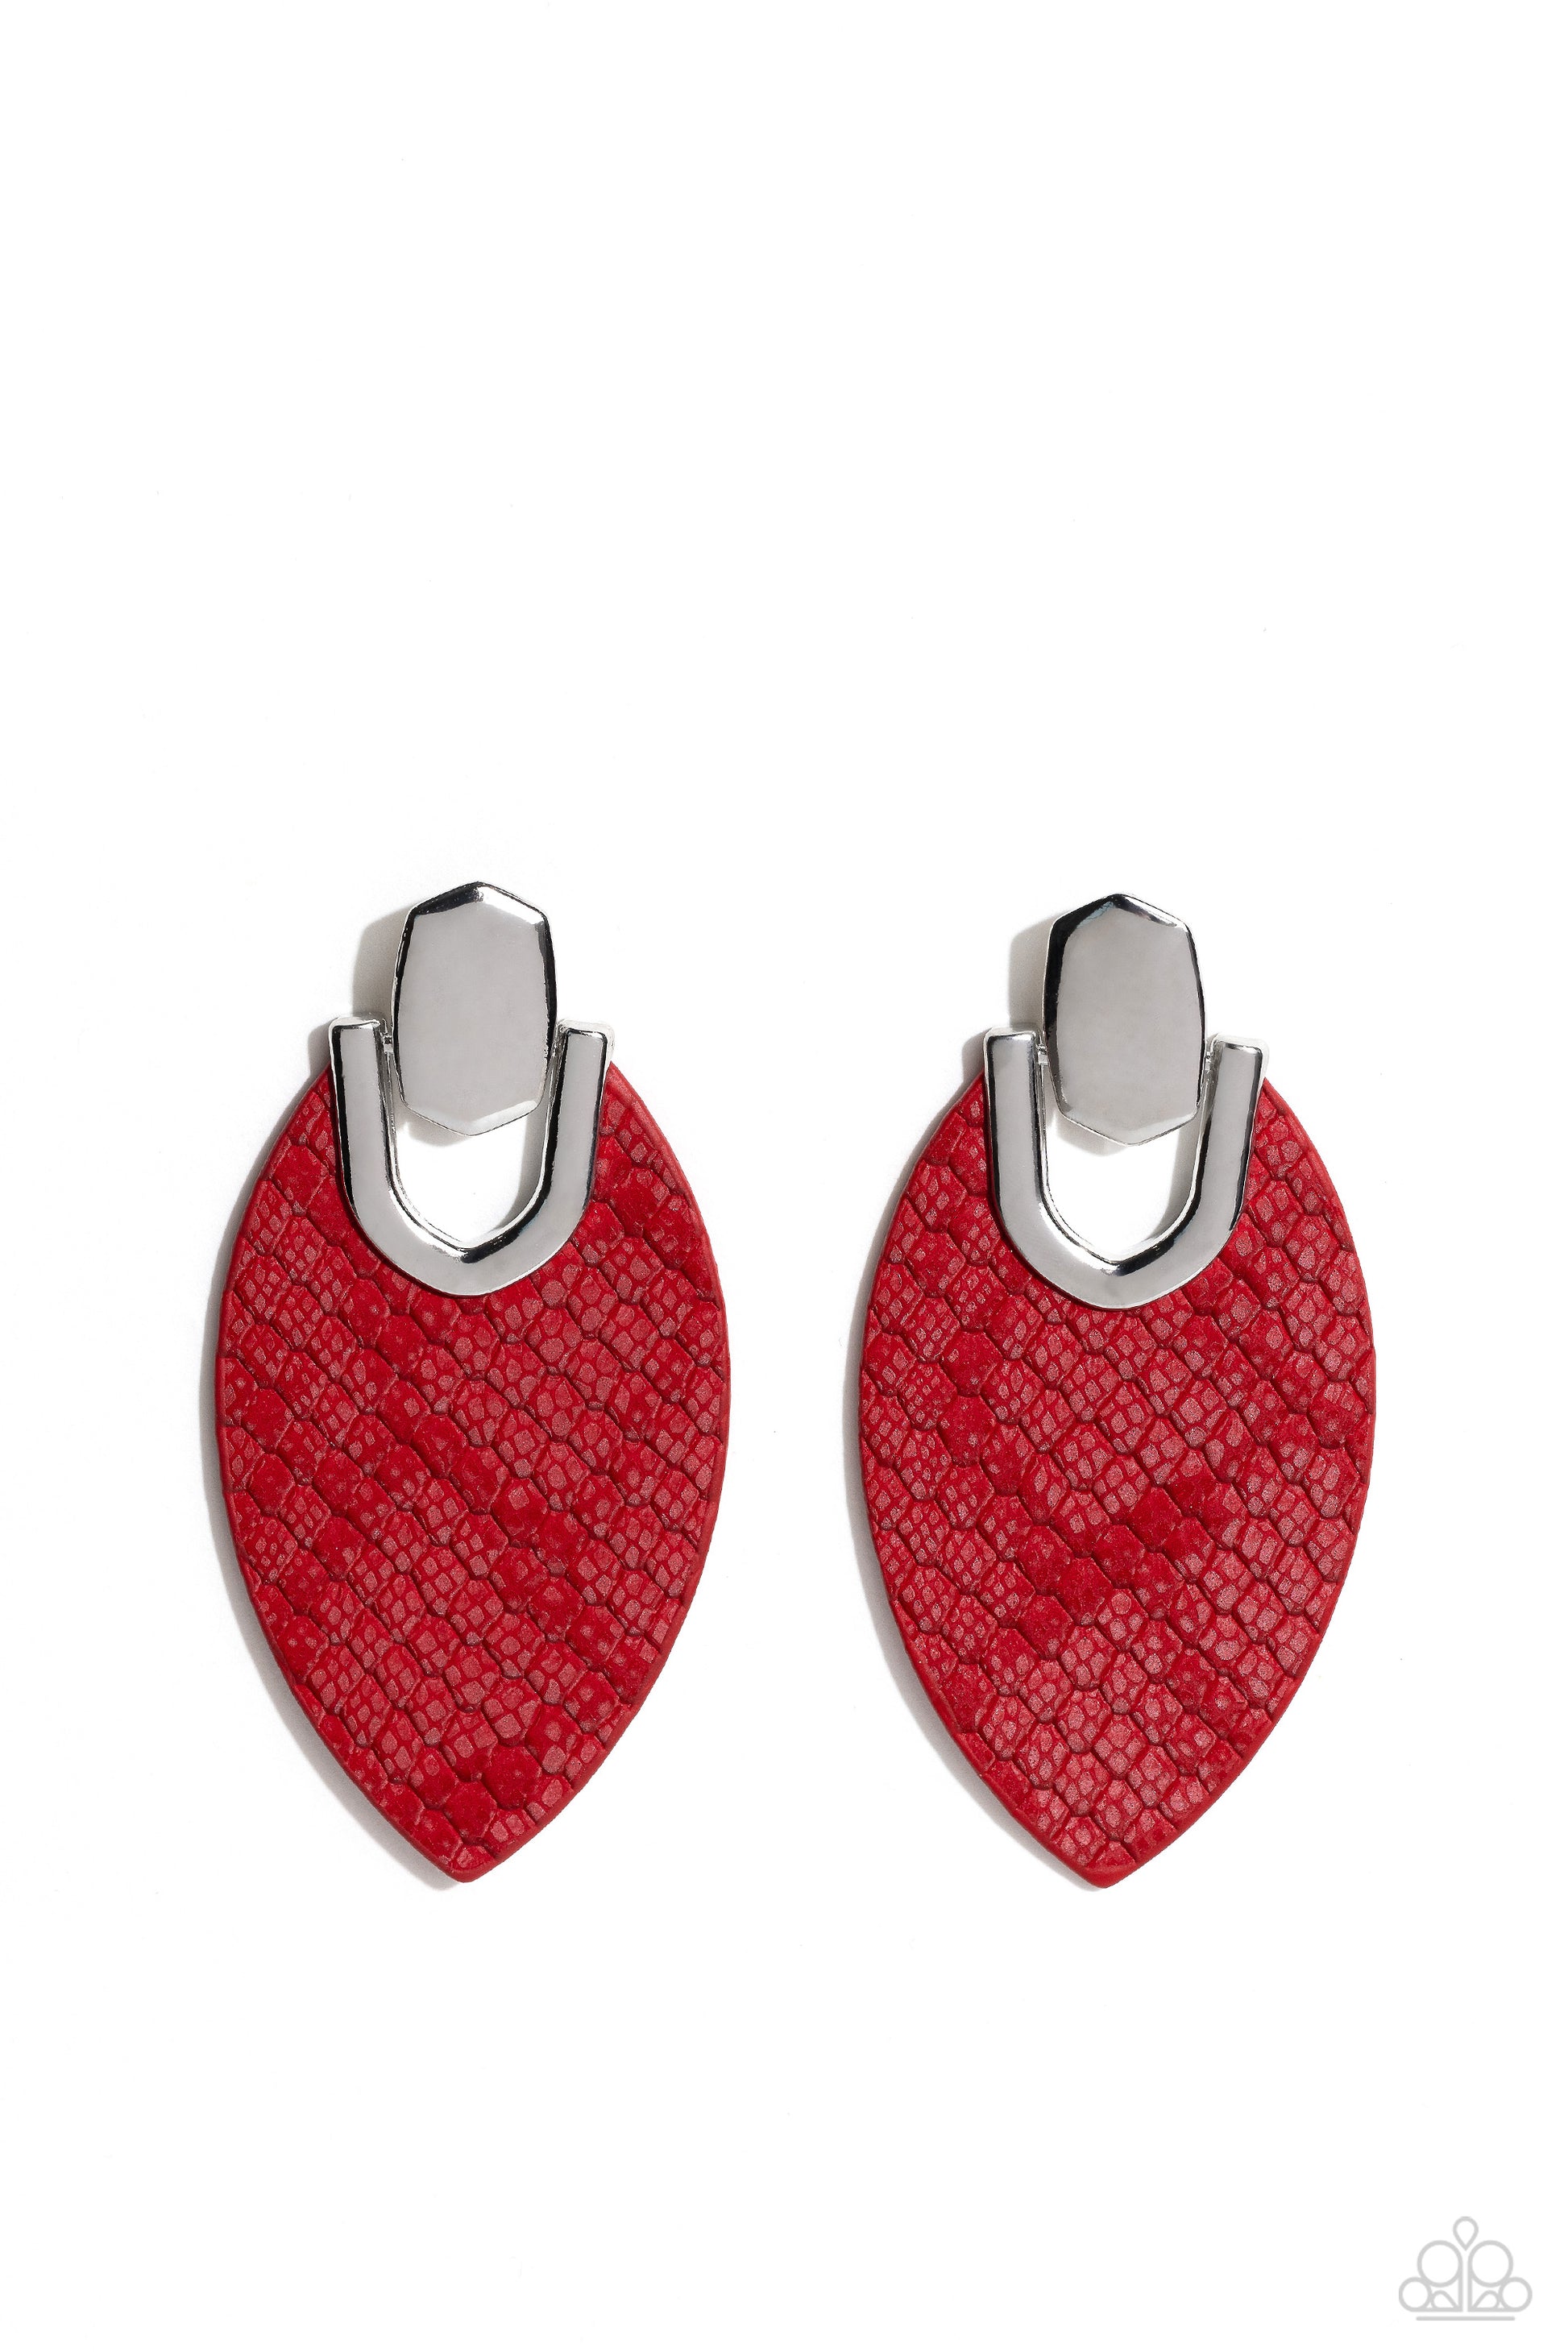 Paparazzi Accessories - Wildly Workable - Red Earrings featuring python-like texture, an oval Fire Whirl leather frame attaches to a bold silver fitting, creating a wild lure. Earring attaches to a standard post fitting.  Sold as one pair of post earrings.